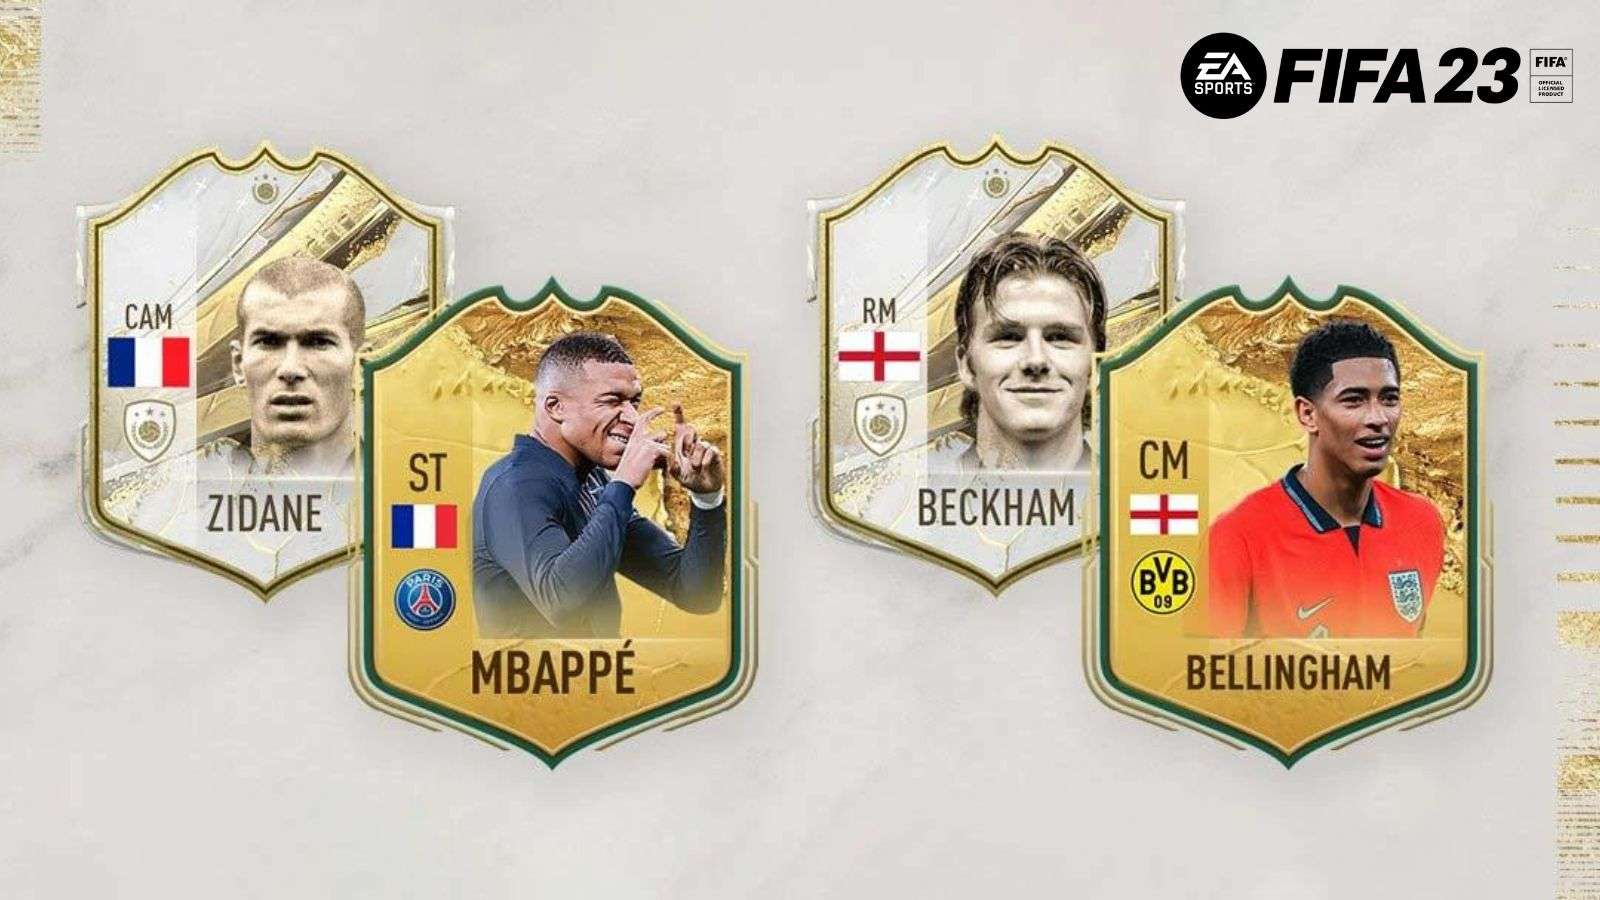 World Cup History Makers in FIFA 23